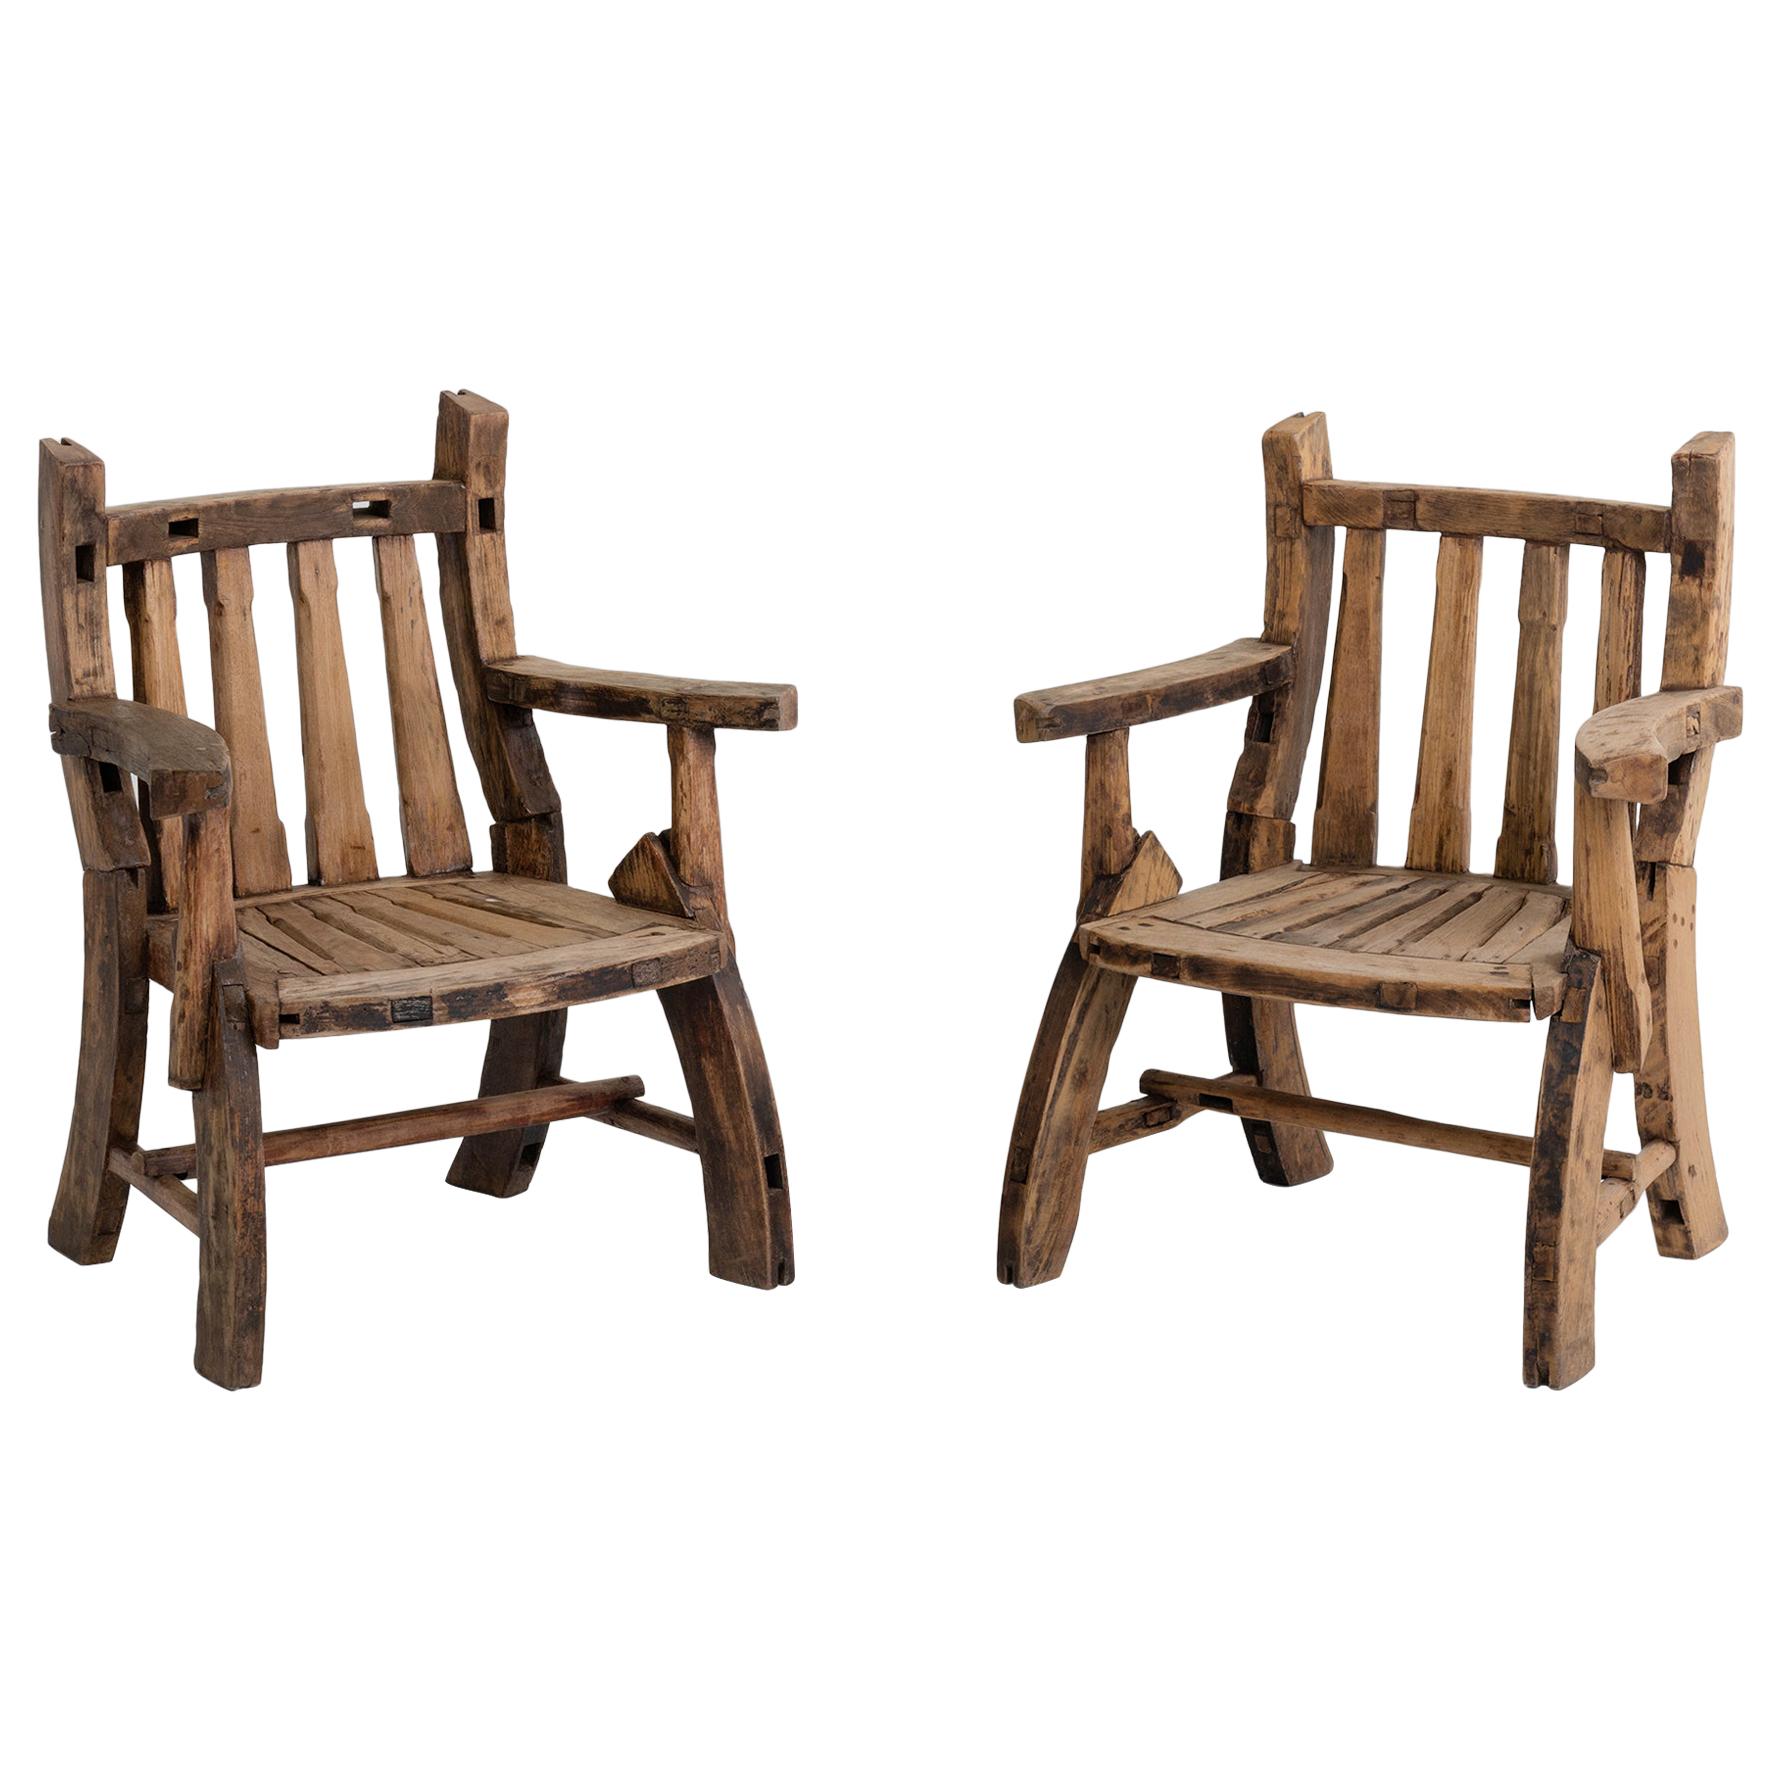 Timber Outdoor Chairs, France circa 1930